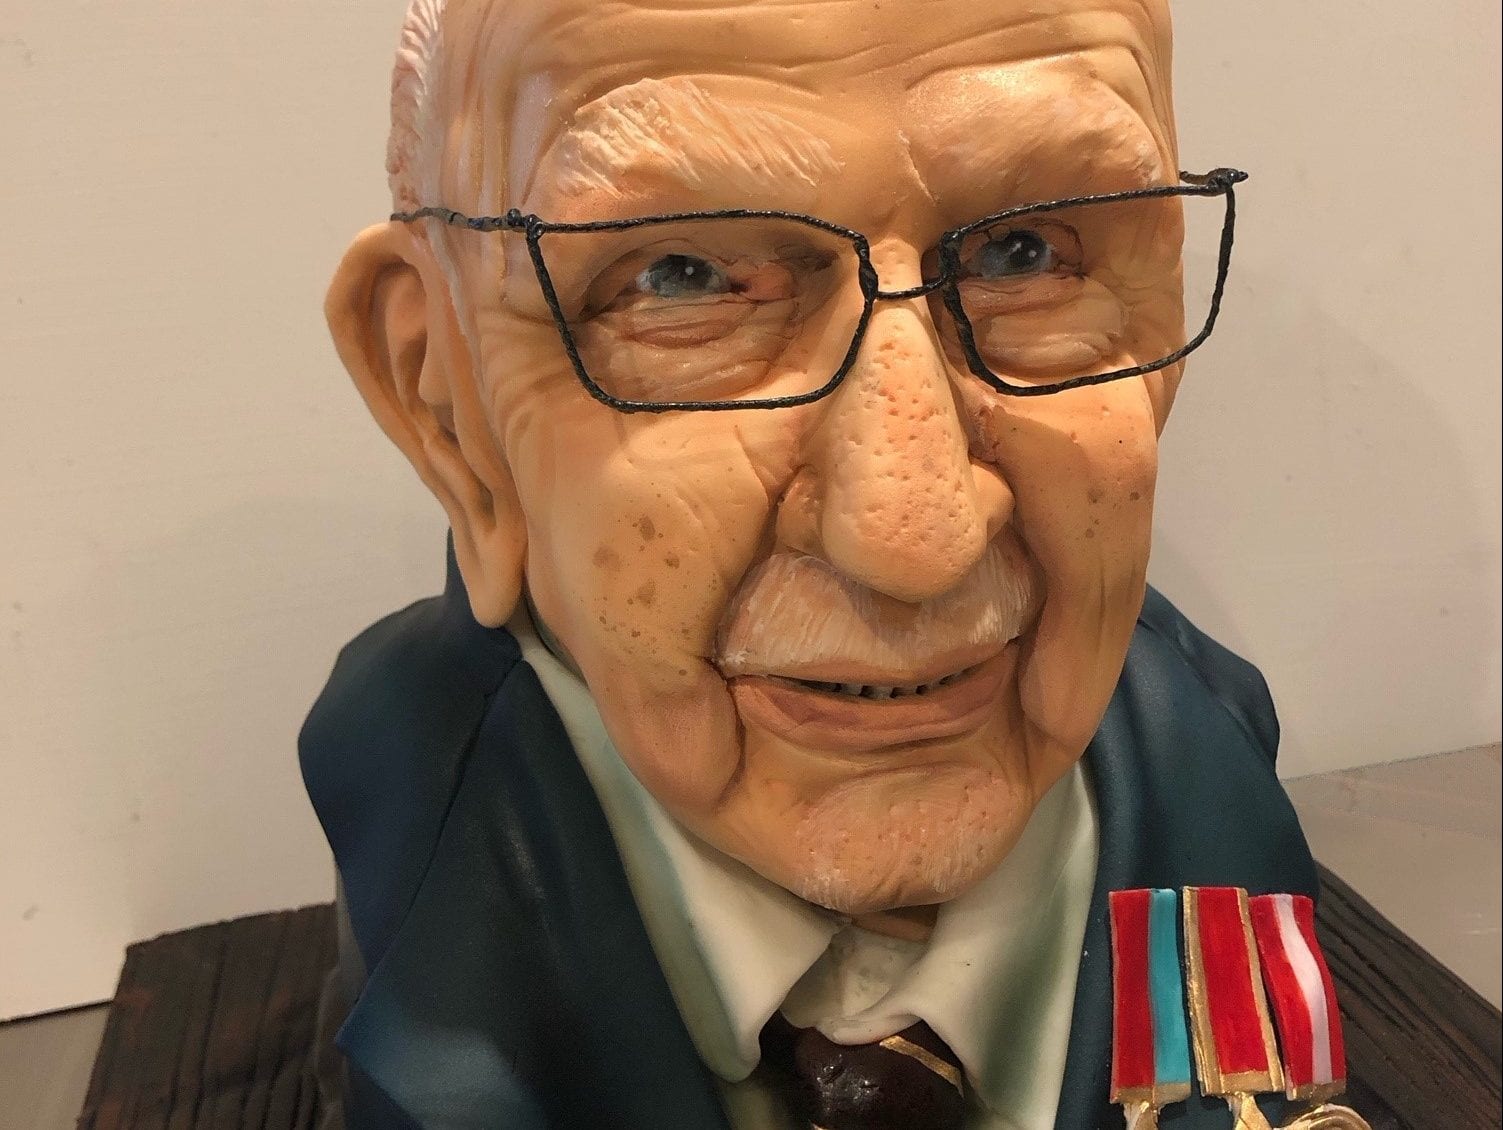 Meet the Liverpool cake artist who created the incredible sponge sculpture  of Captain Tom Moore - The Guide Liverpool